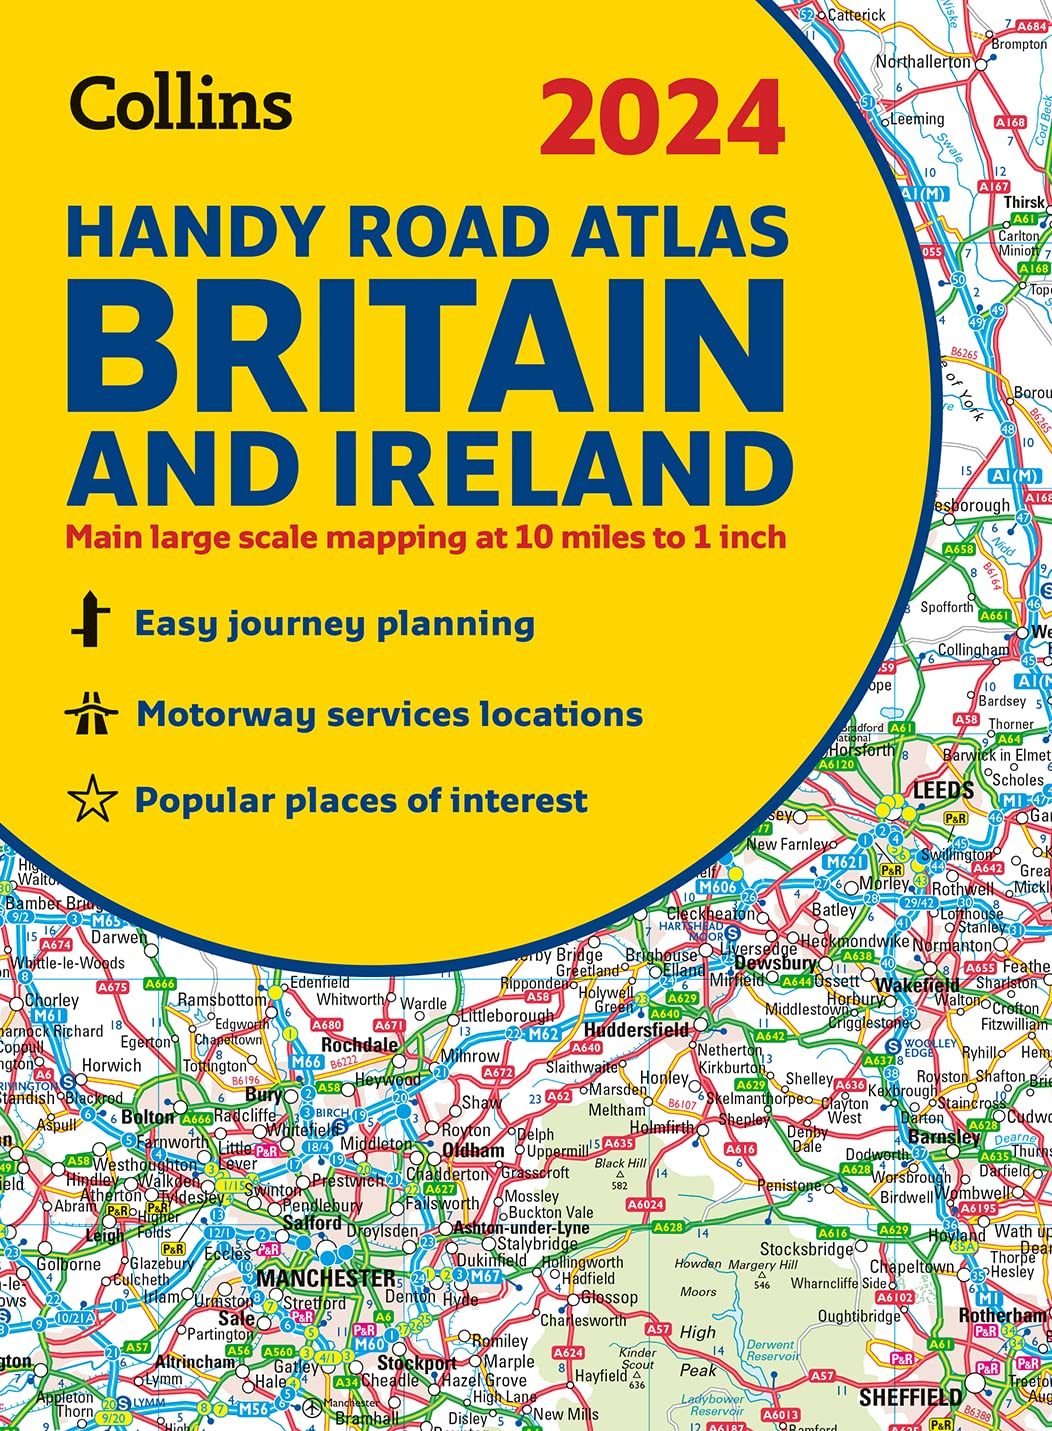 Britain and Ireland Handy Road Atlas by Collins Maps (2024)